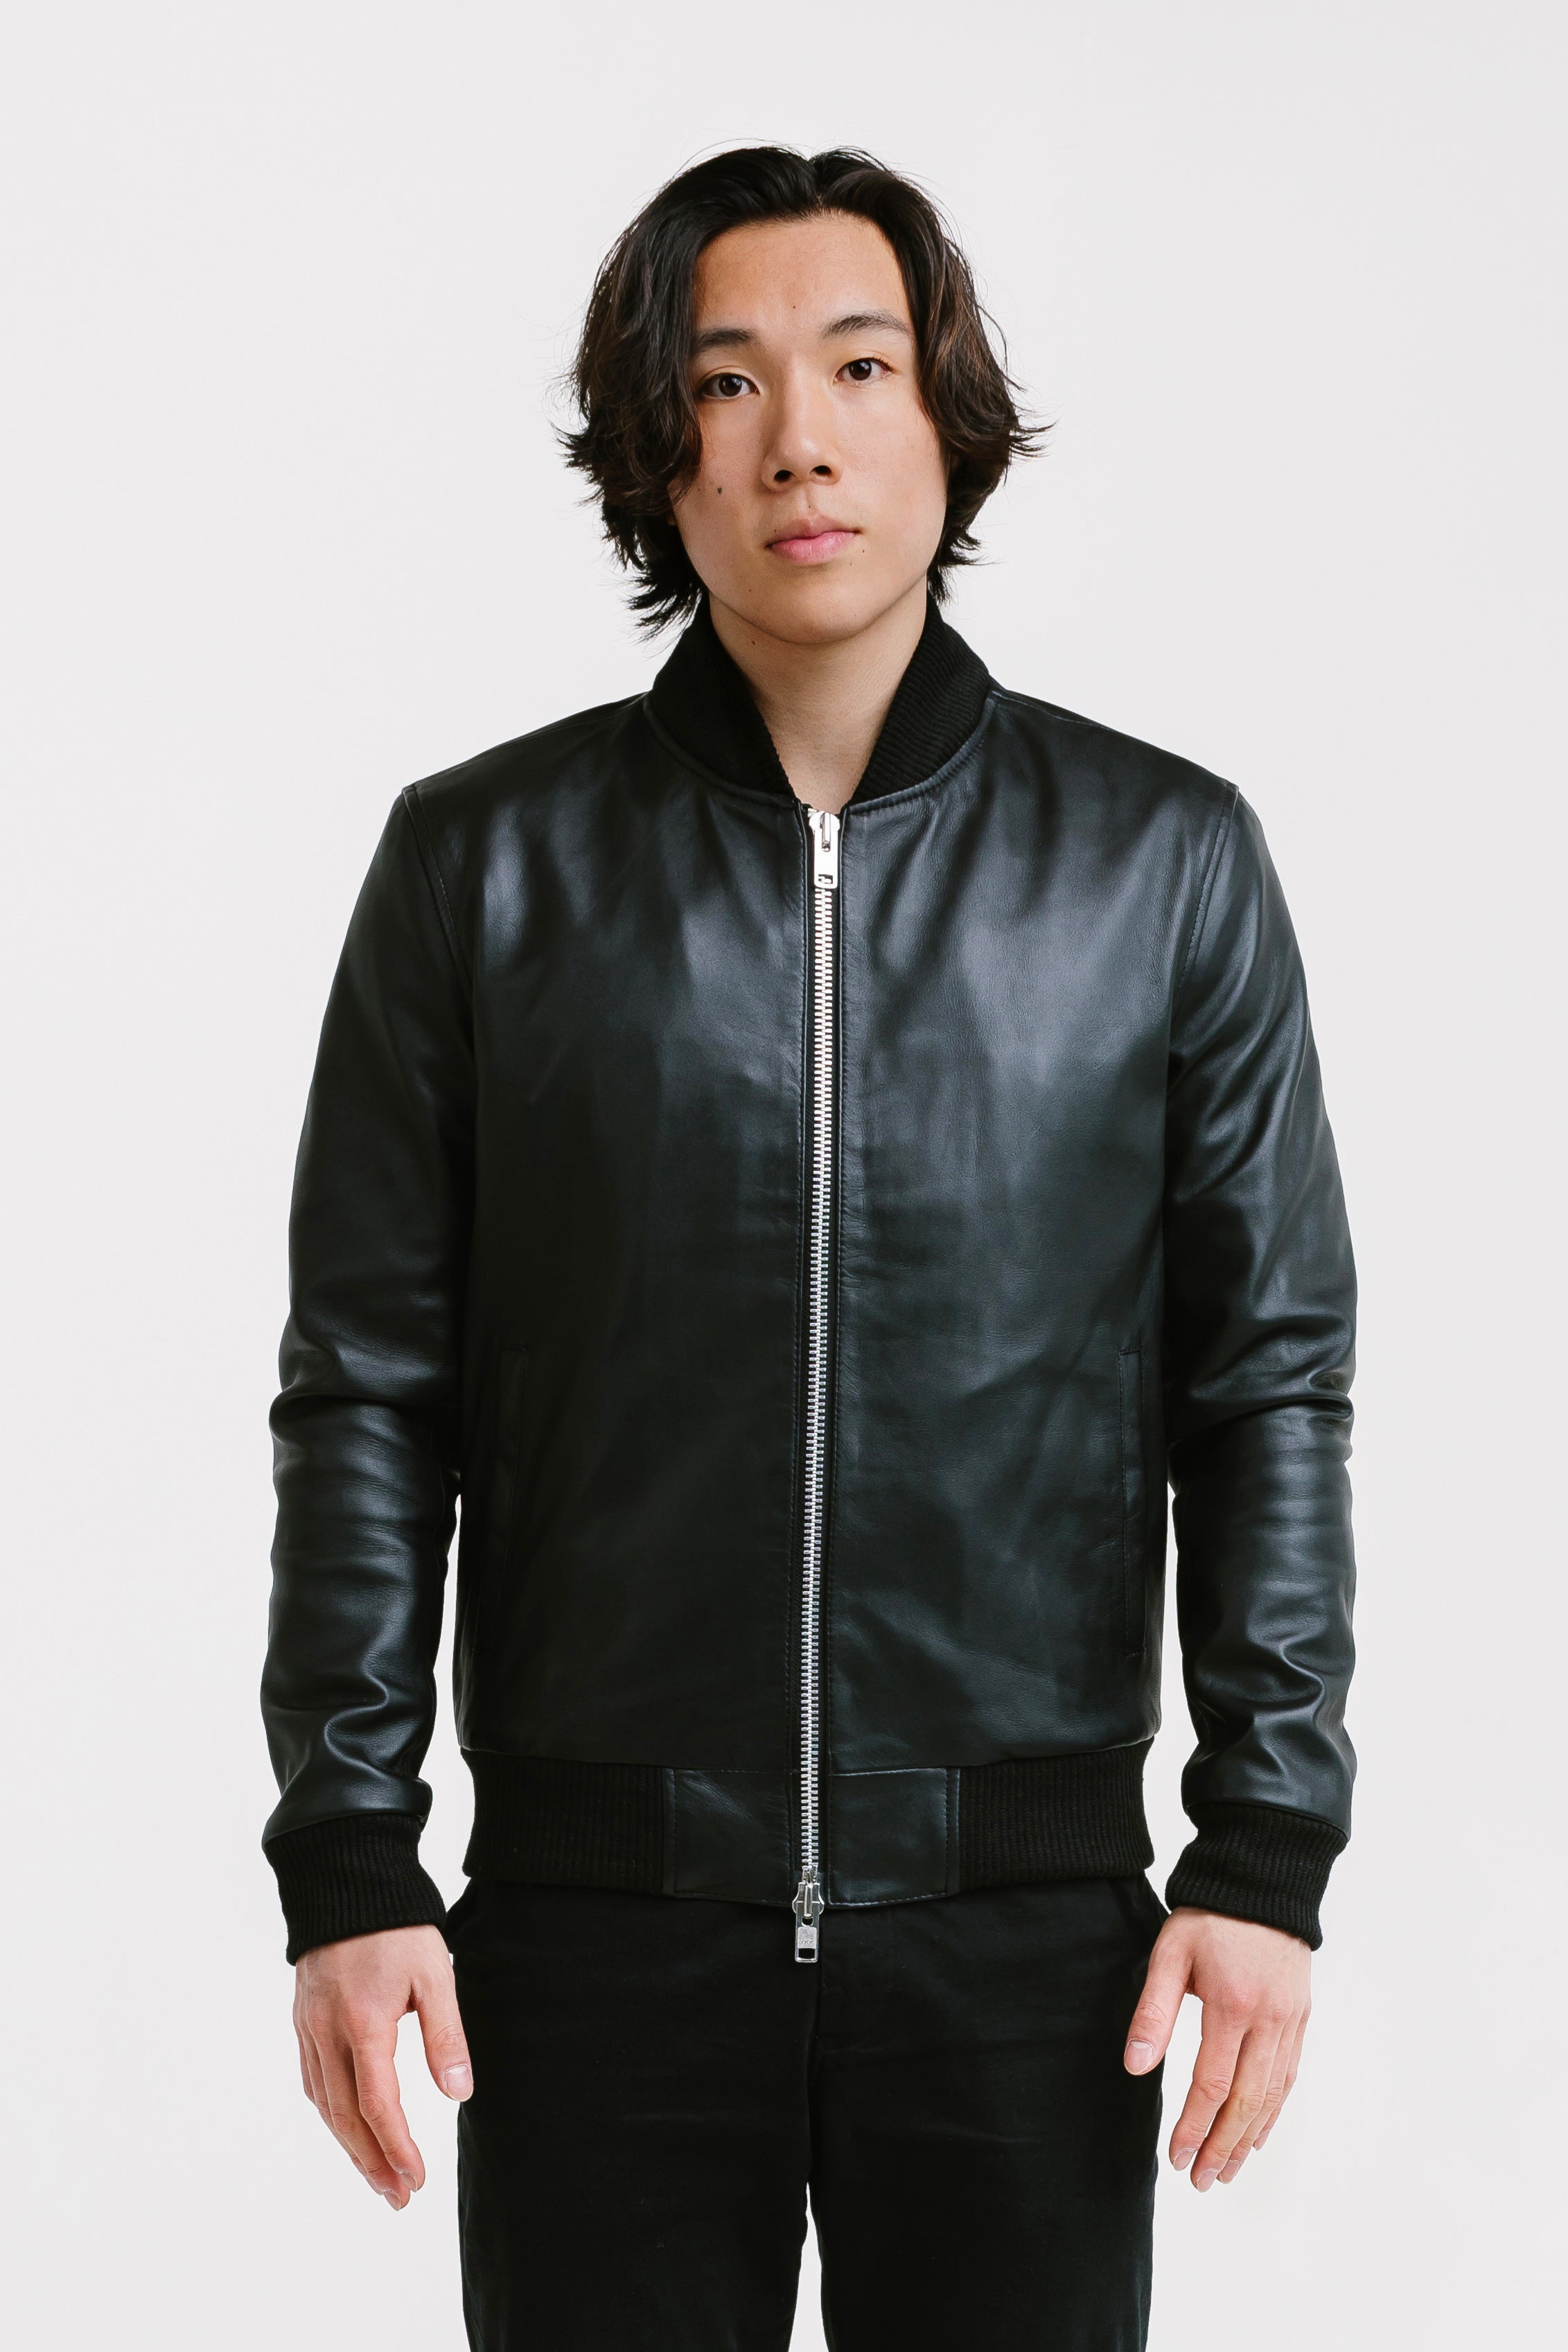 Modern men's leather Jacket designed in Vancouver Canada – Threads of ...